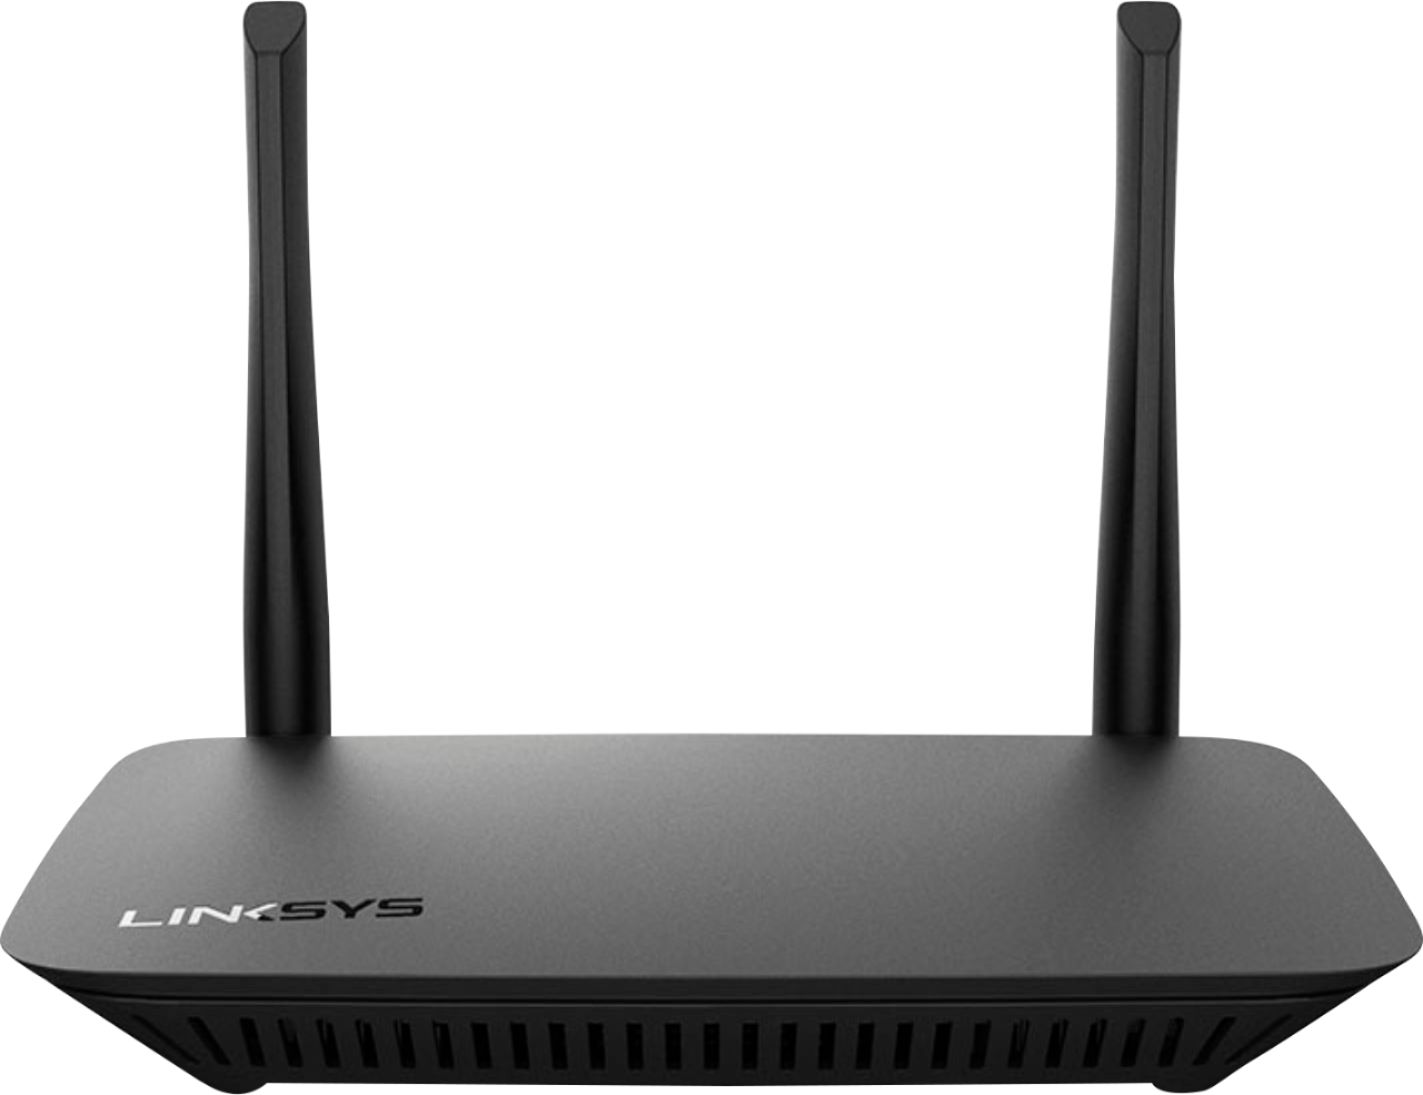 Linksys - WiFi 5 Router Dual-Band AC1200 - Black